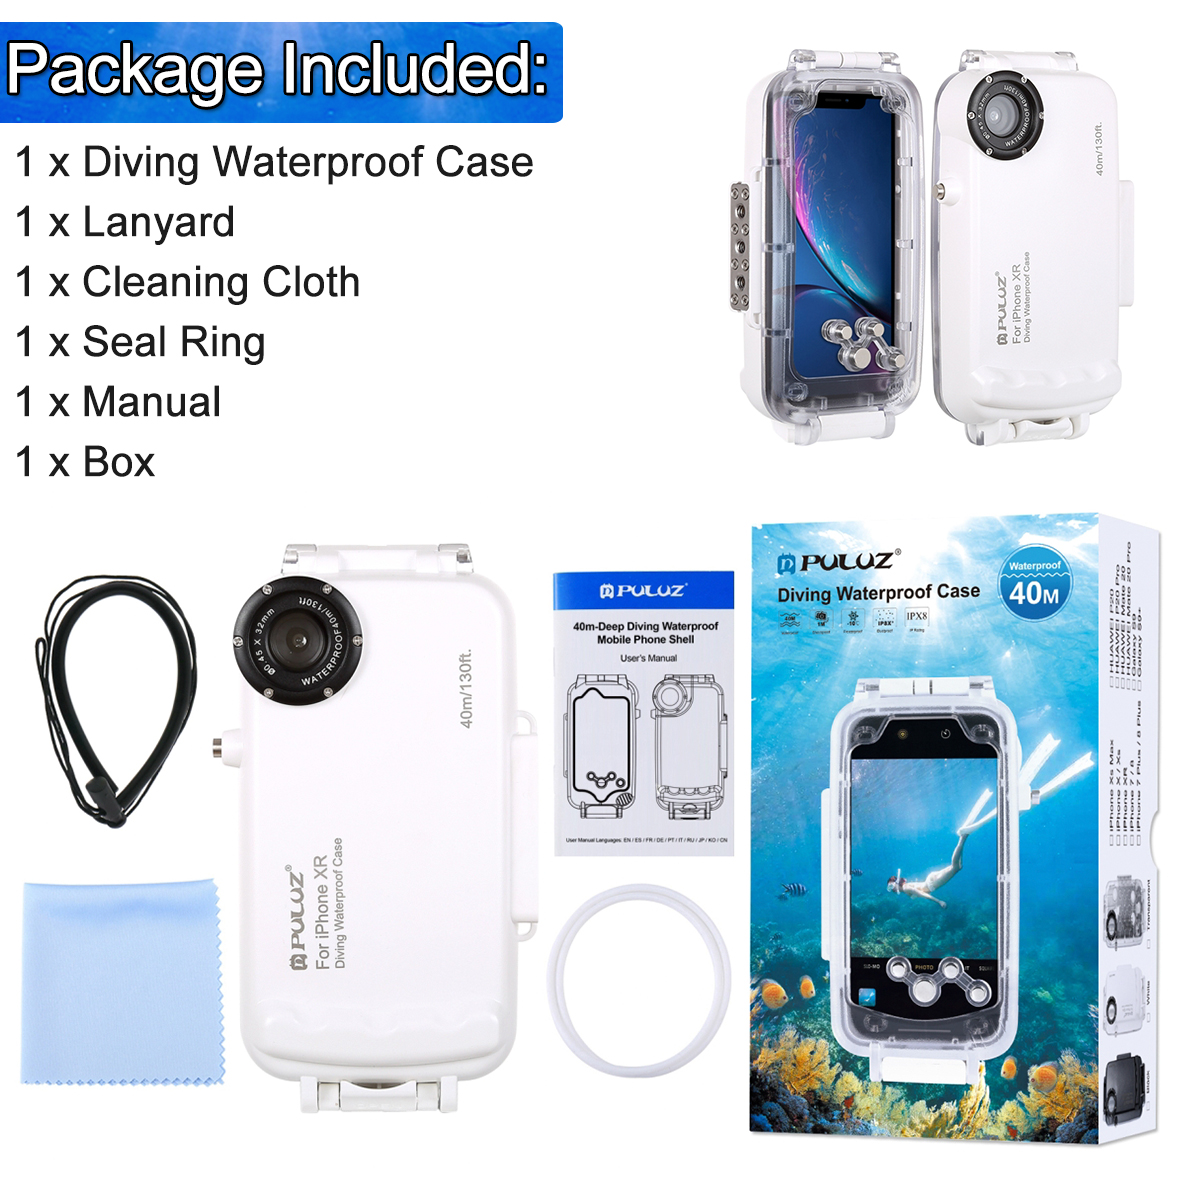 PULUZ-40m-Waterproof-Diving-Shell-Shockproof-Protective-Case-for-iphone-XR-XS-Max-iP7-Plus8-Plus-1635316-9